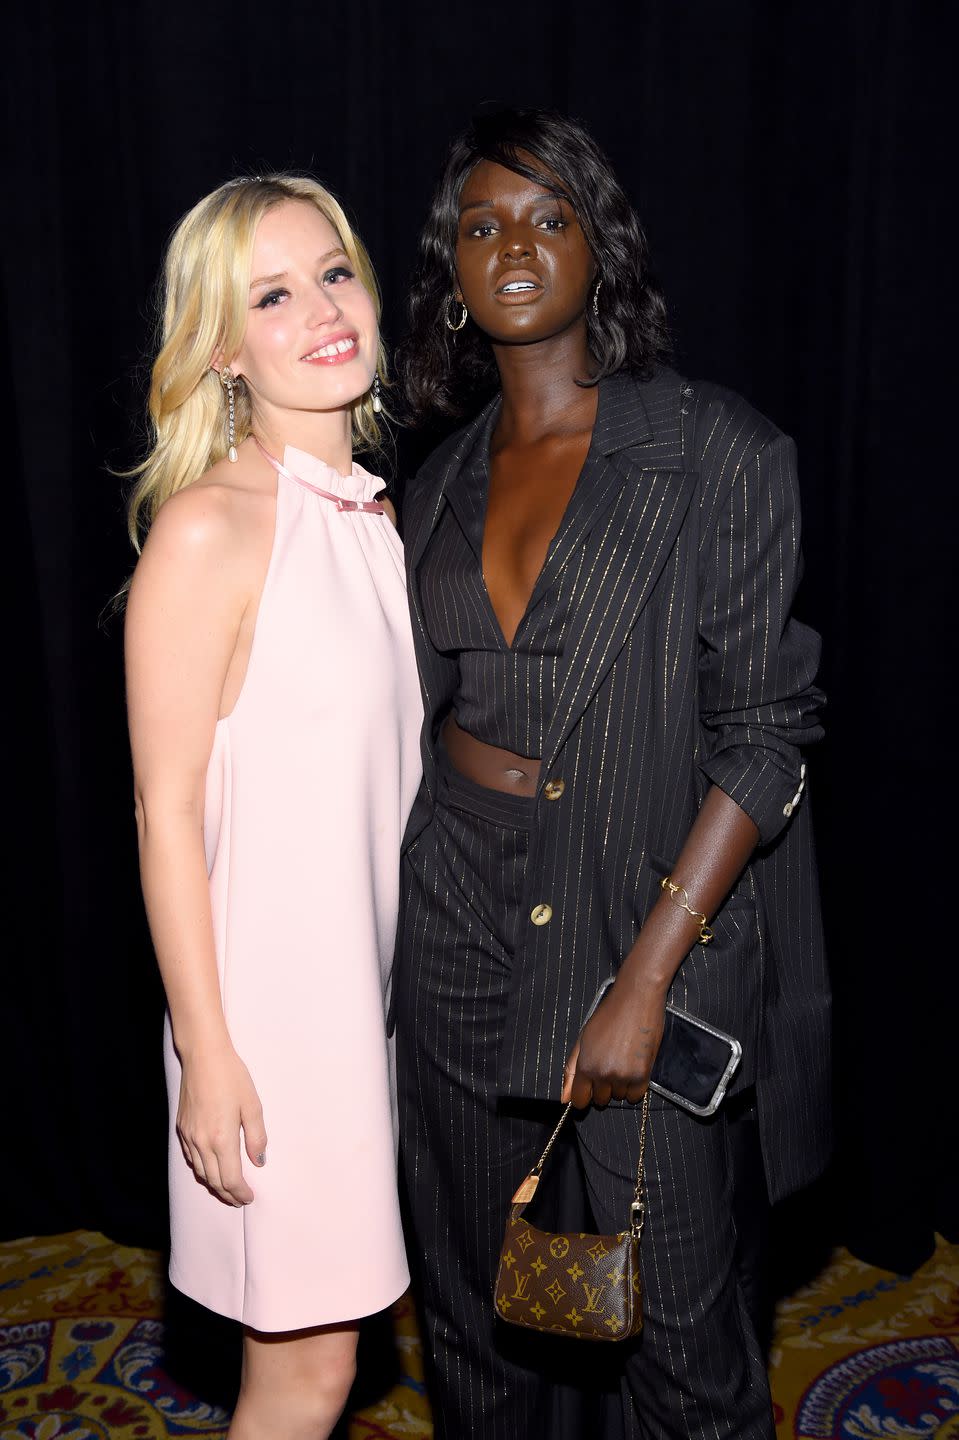 Georgia May Jagger and Duckie Thot